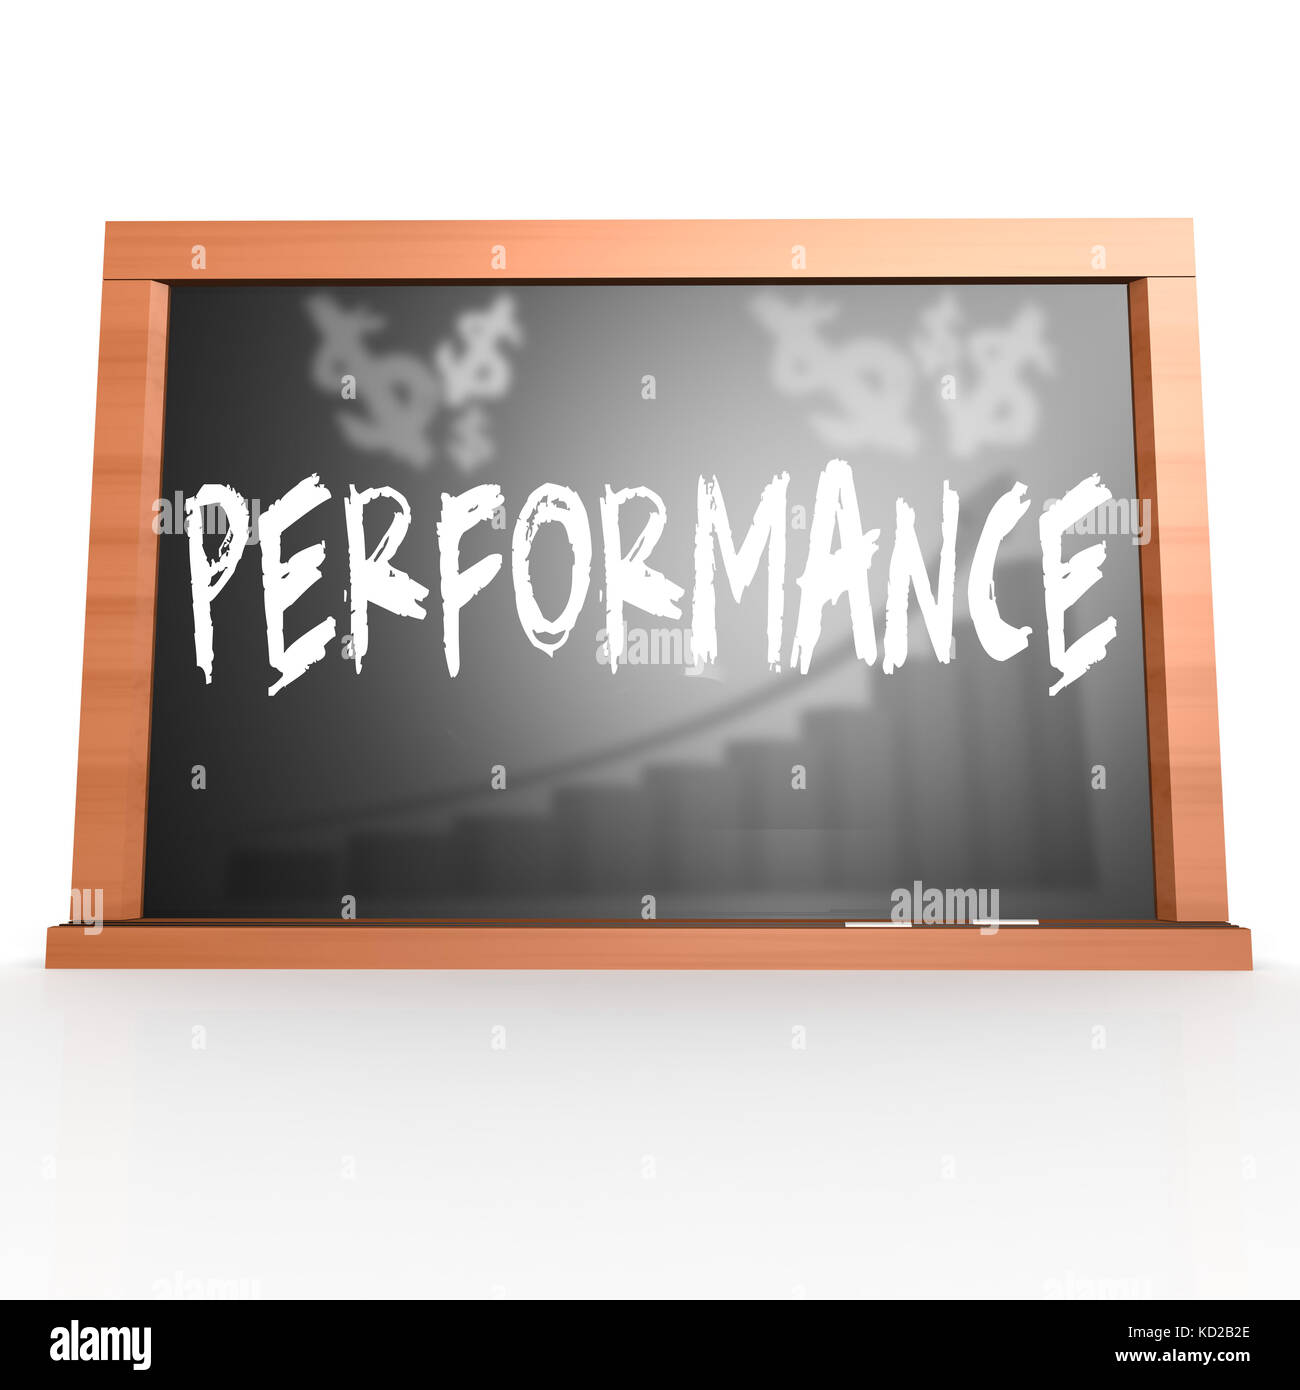 https://c8.alamy.com/comp/KD2B2E/black-board-with-performance-word-image-with-hi-res-rendered-artwork-KD2B2E.jpg